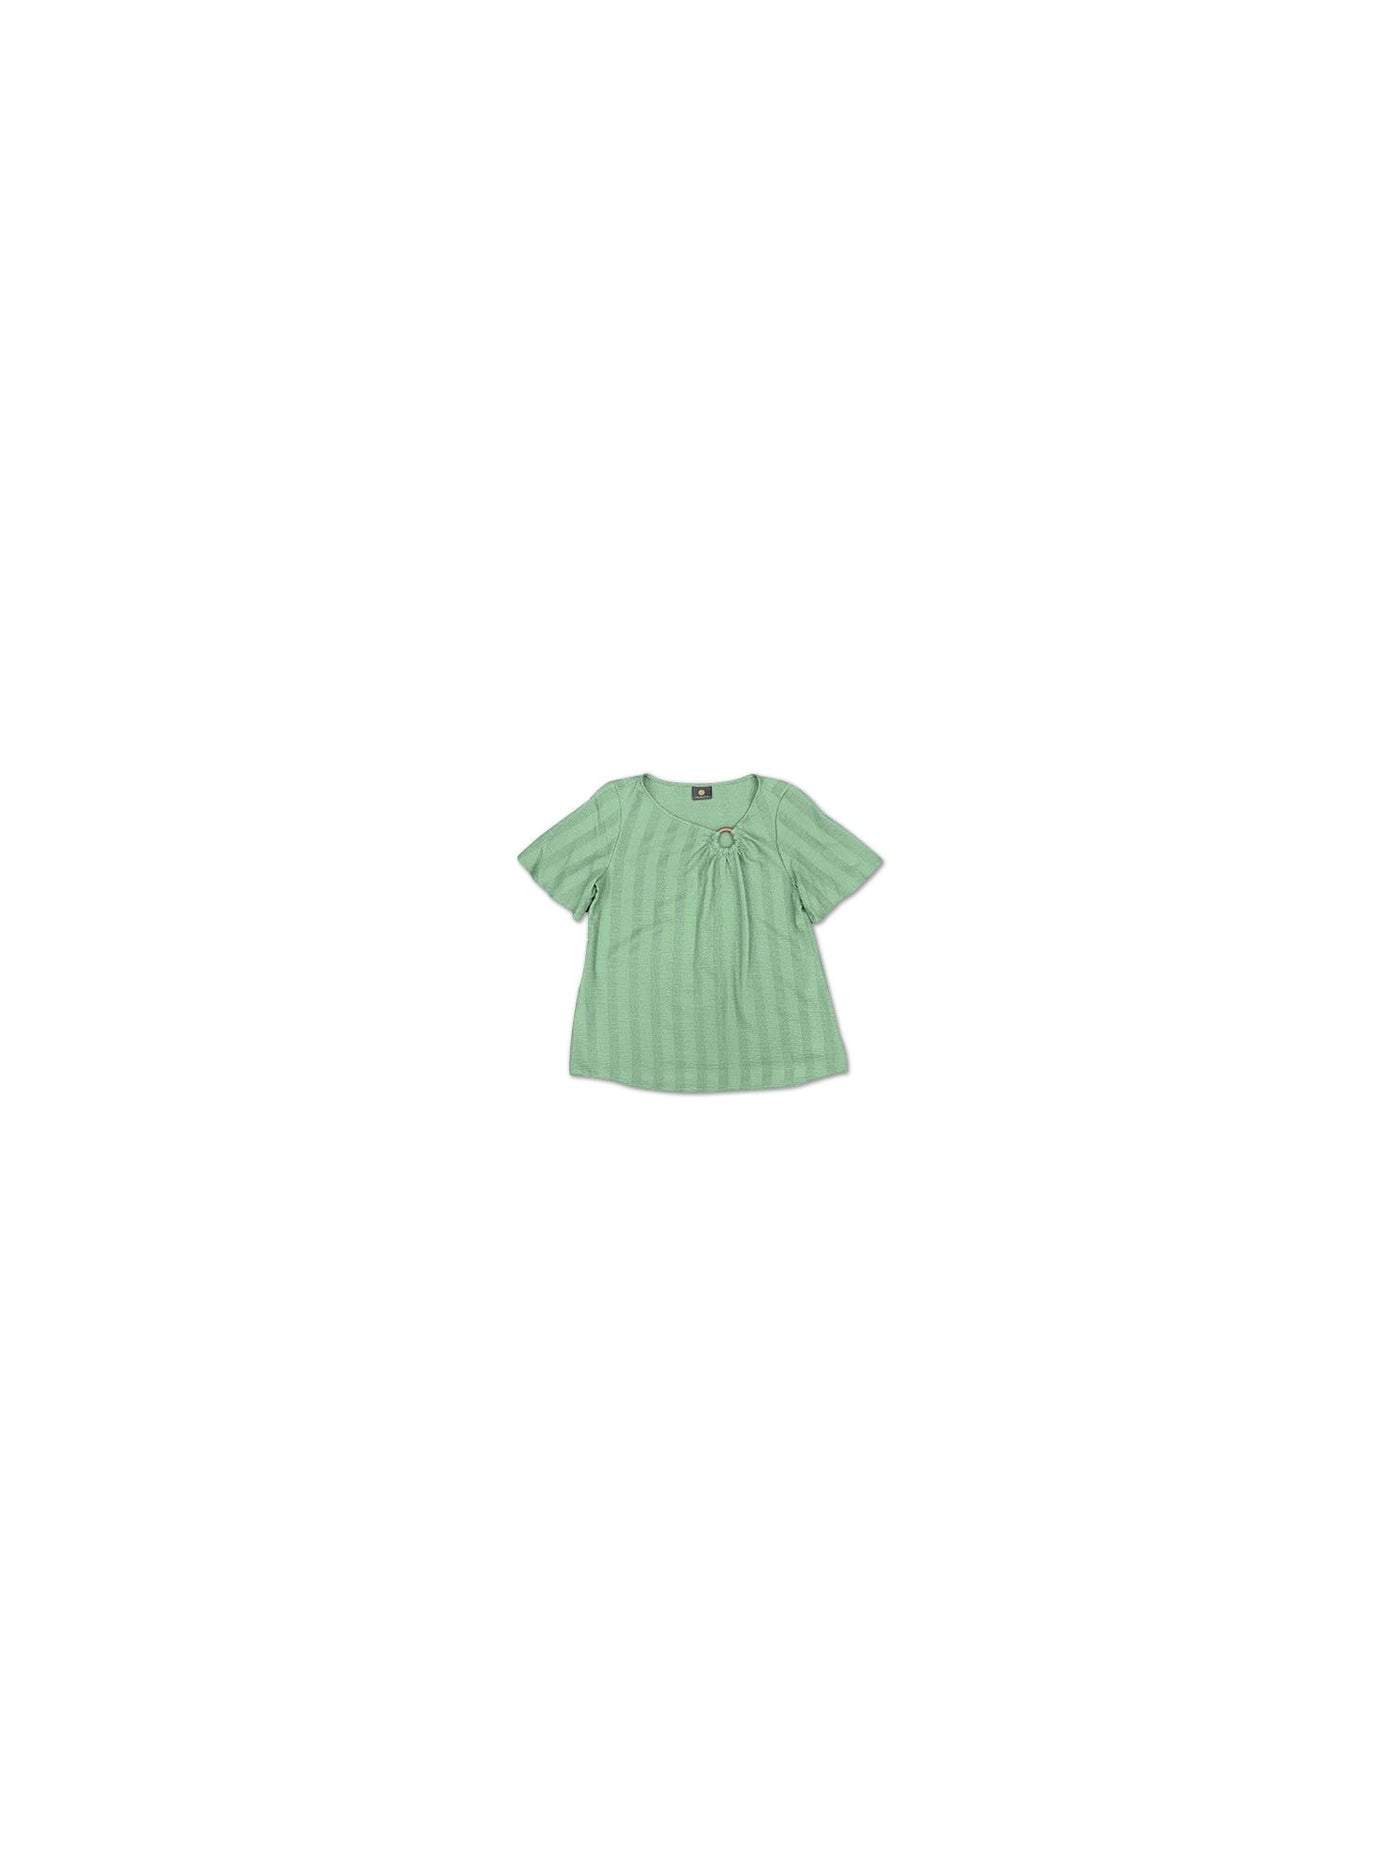 JM COLLECTION Womens Green Gathered O-ring Striped Short Sleeve Scoop Neck Top Petites PP